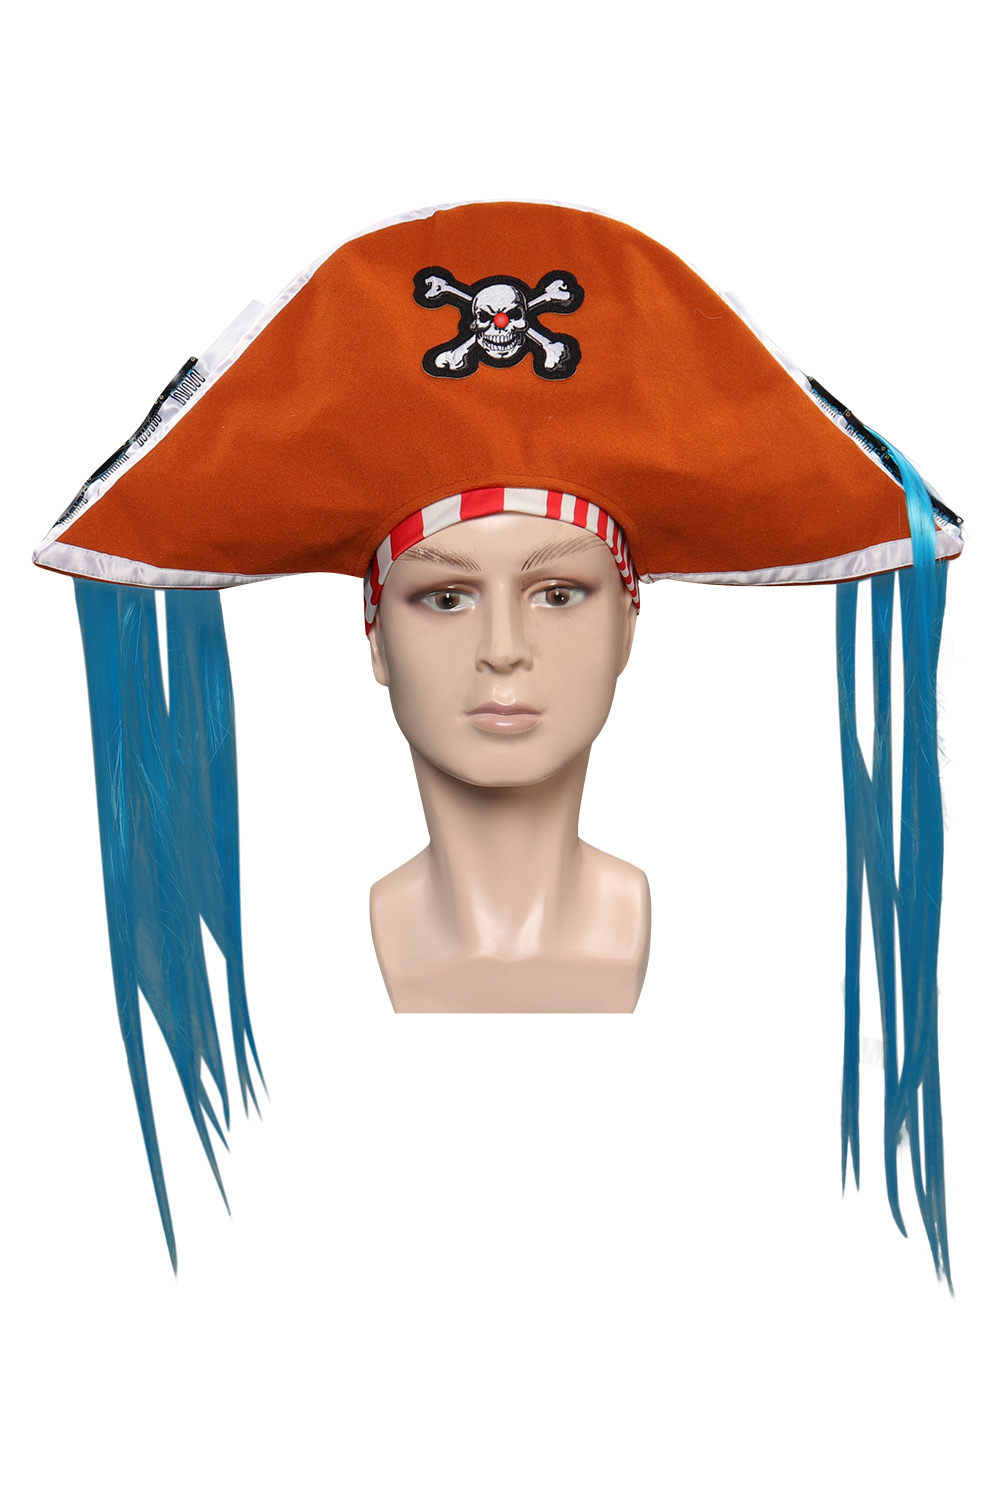 TV One Piece 2023 Buggy Pirate Hat Cosplay Cap Headgear Halloween Carnival Costume Accessories